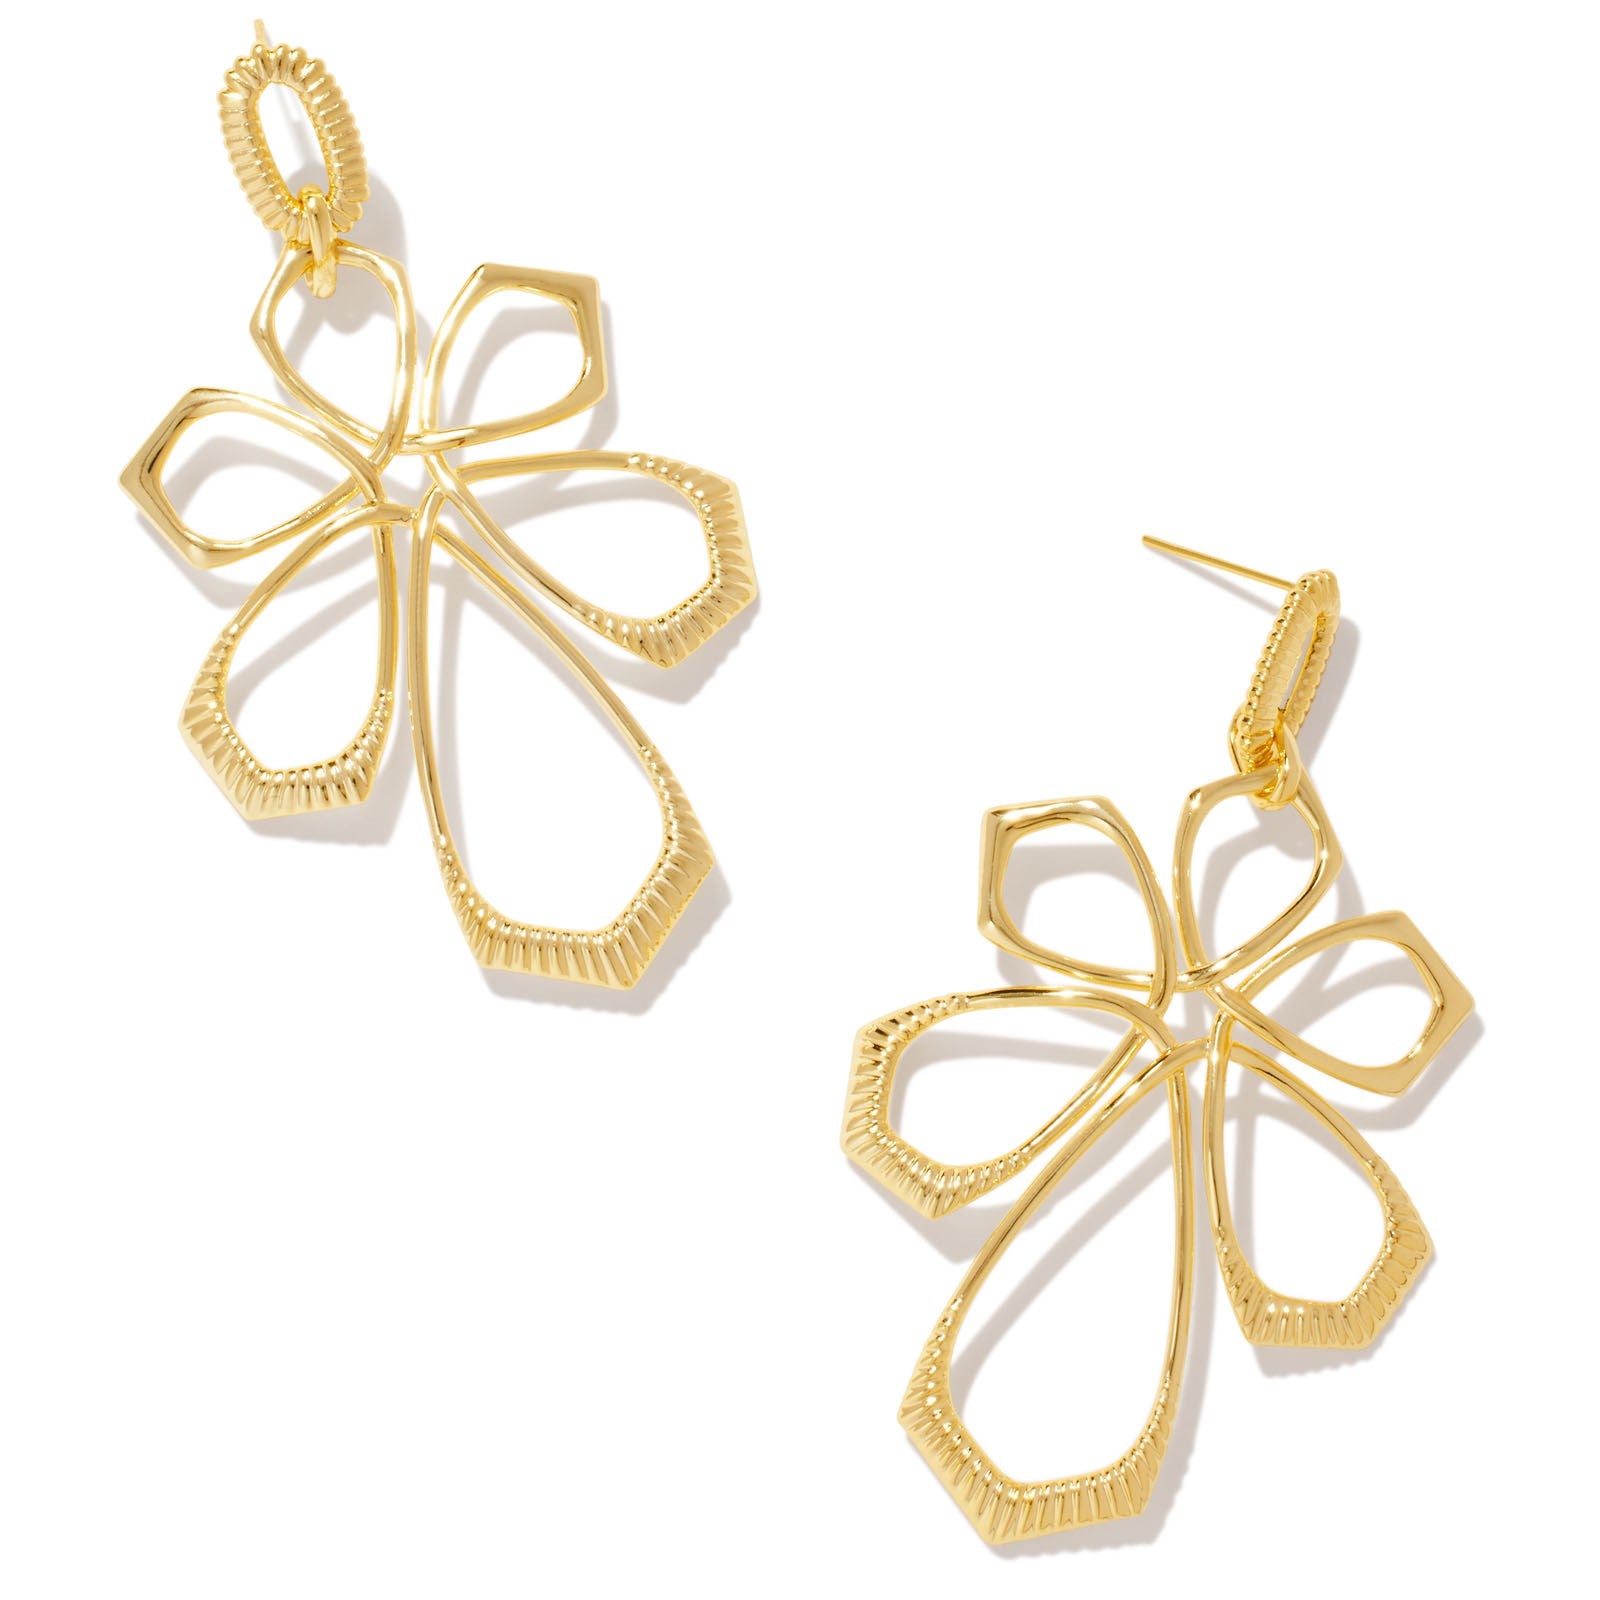 Kendra Scott | Layne Gold Statement Earrings - Giddy Up Glamour Boutique